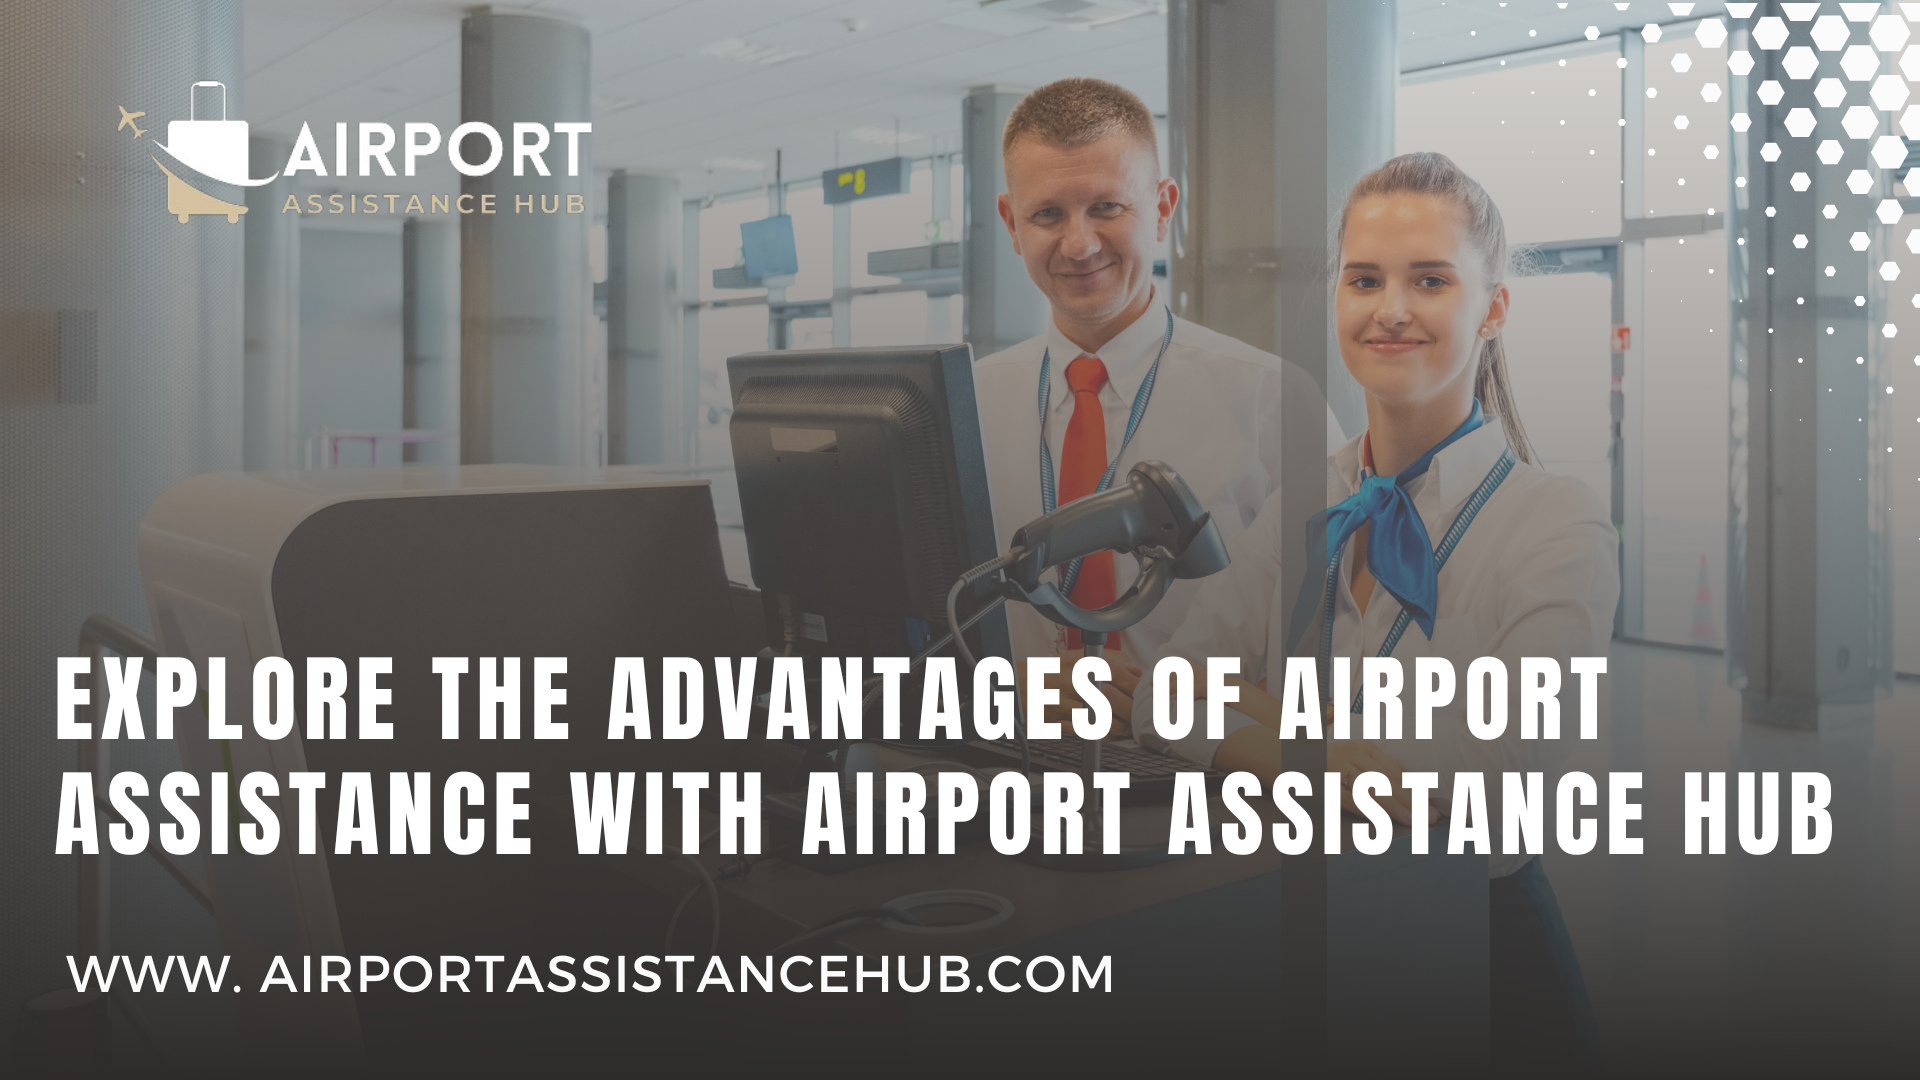 Explore the Advantages of Airport Assistance with Airport Assistance Hub